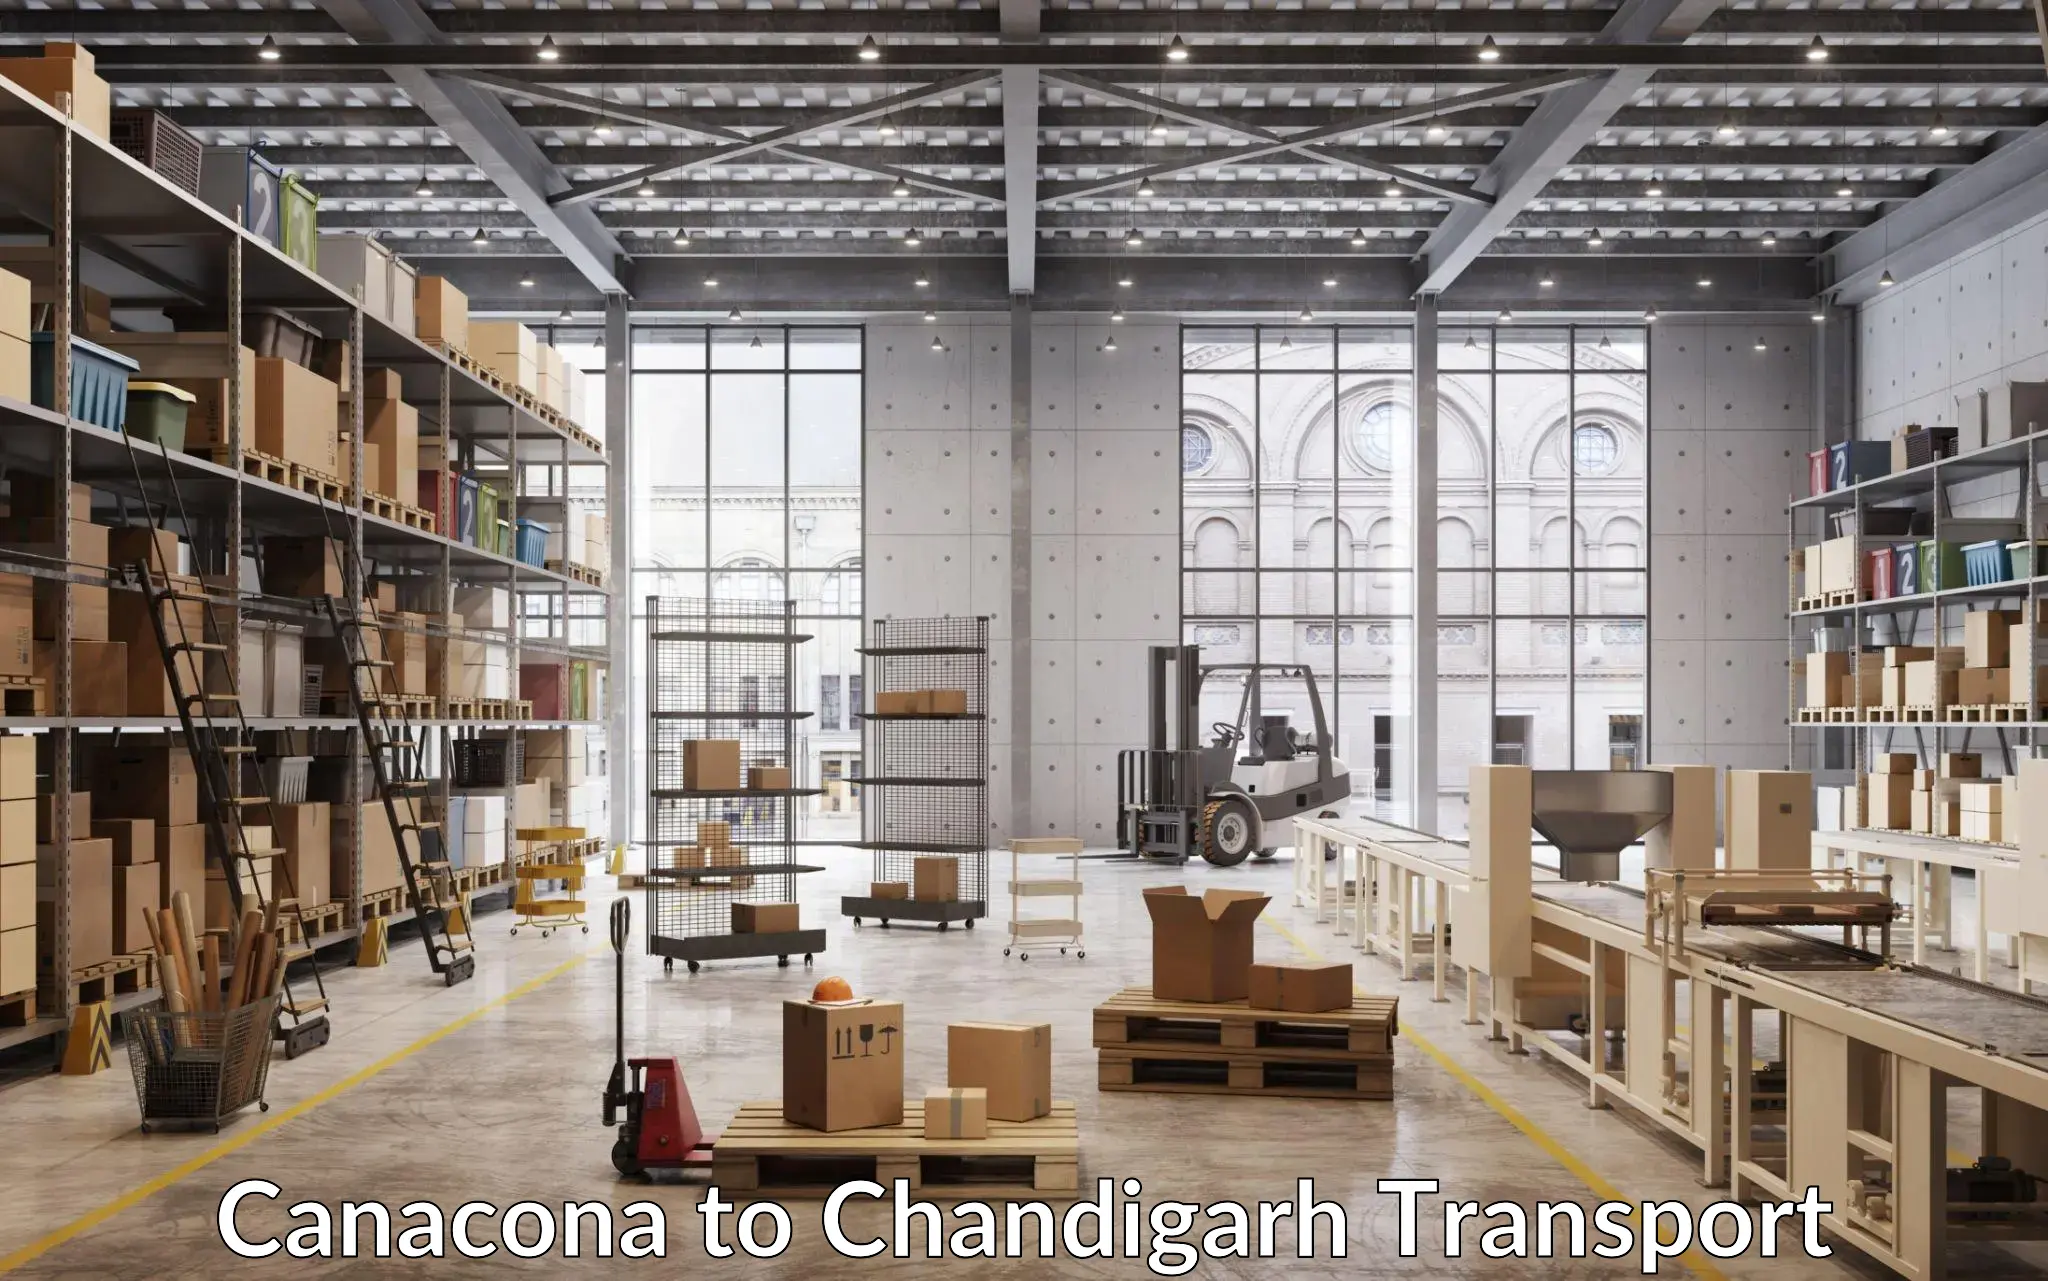 Container transport service Canacona to Chandigarh